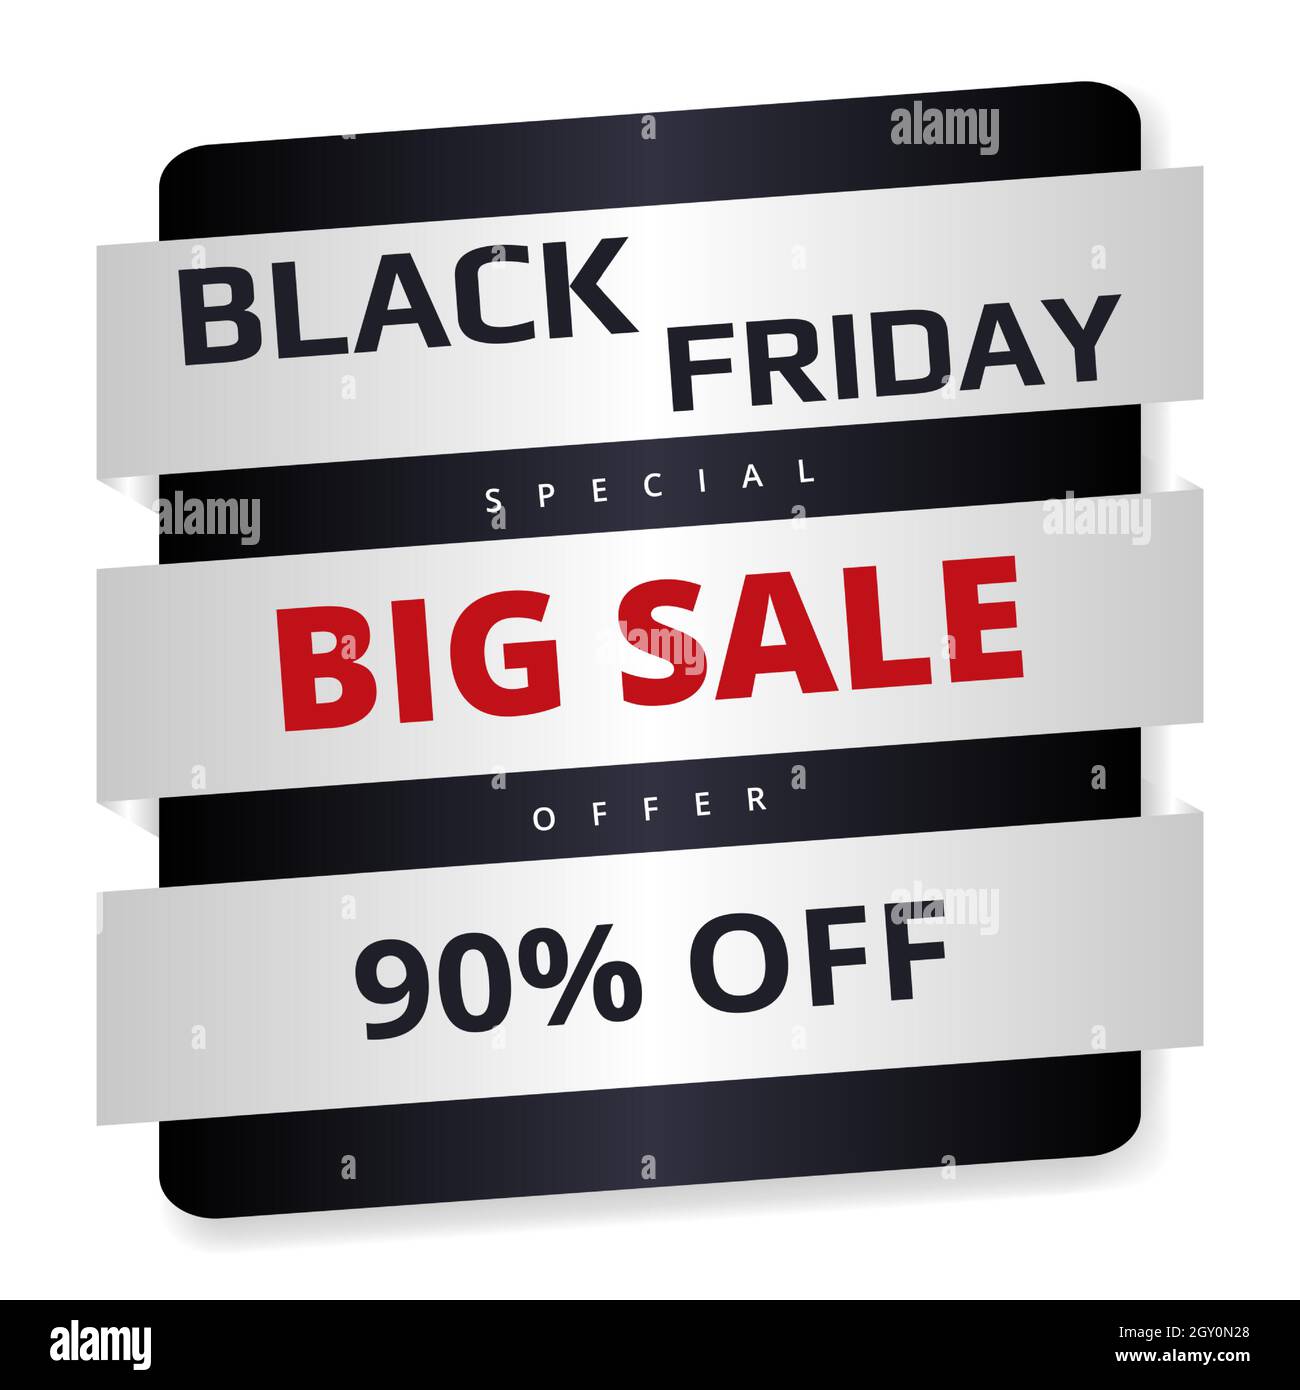 Black friday, white abstract banner. Black friday banner template silver and gray paper shapes on a white background. Sale up to 90 percent off. Stock Vector